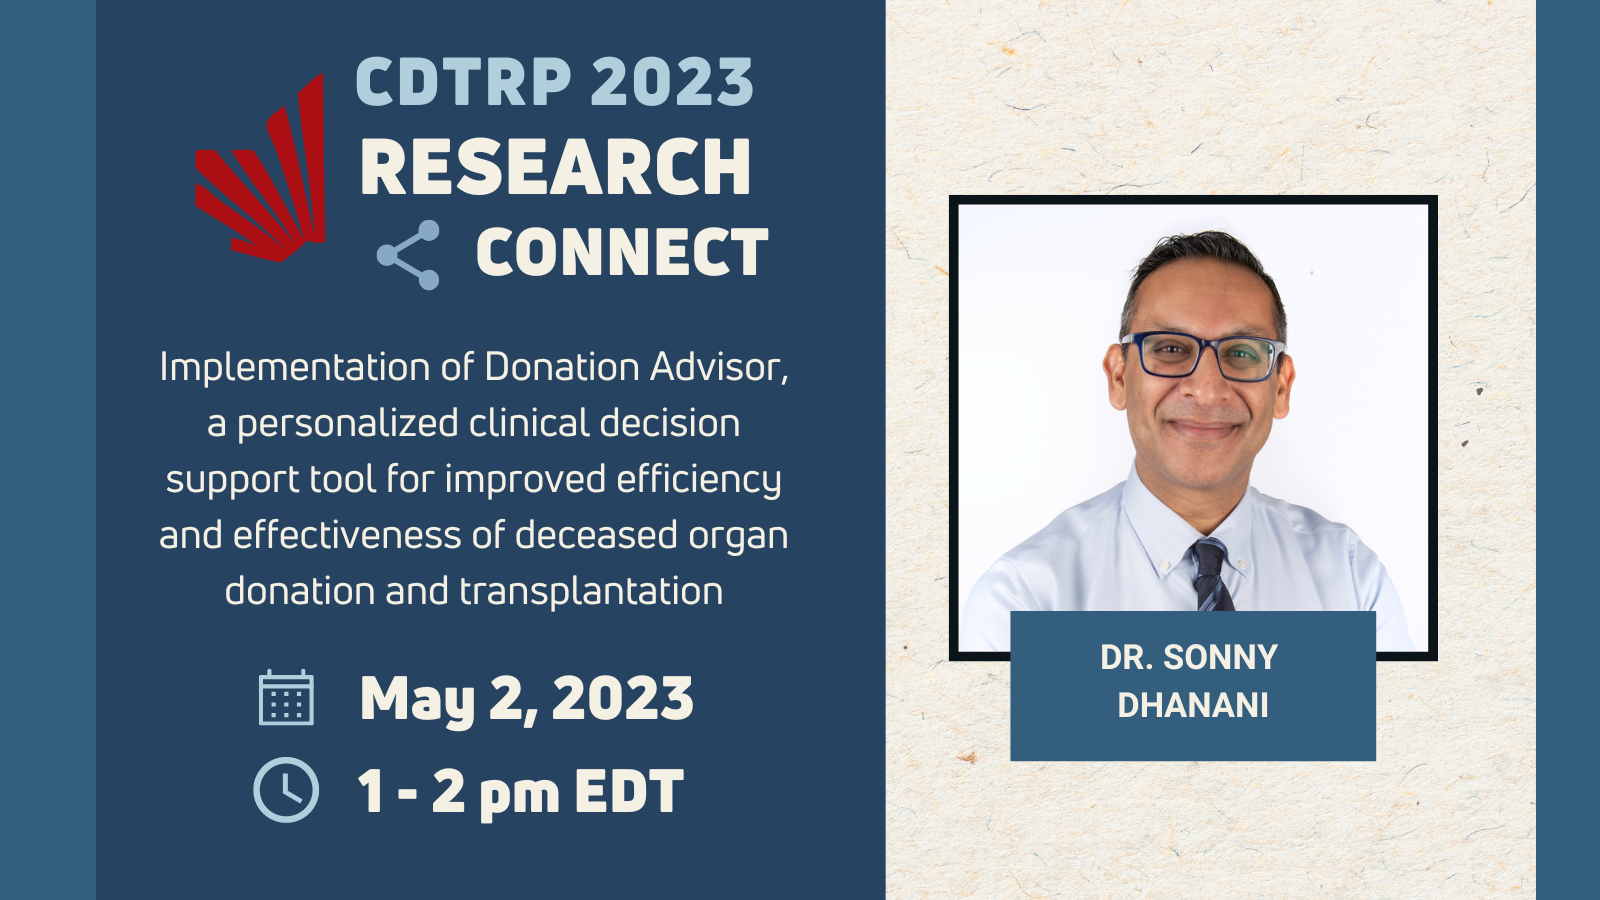 CDTRP Research Connect